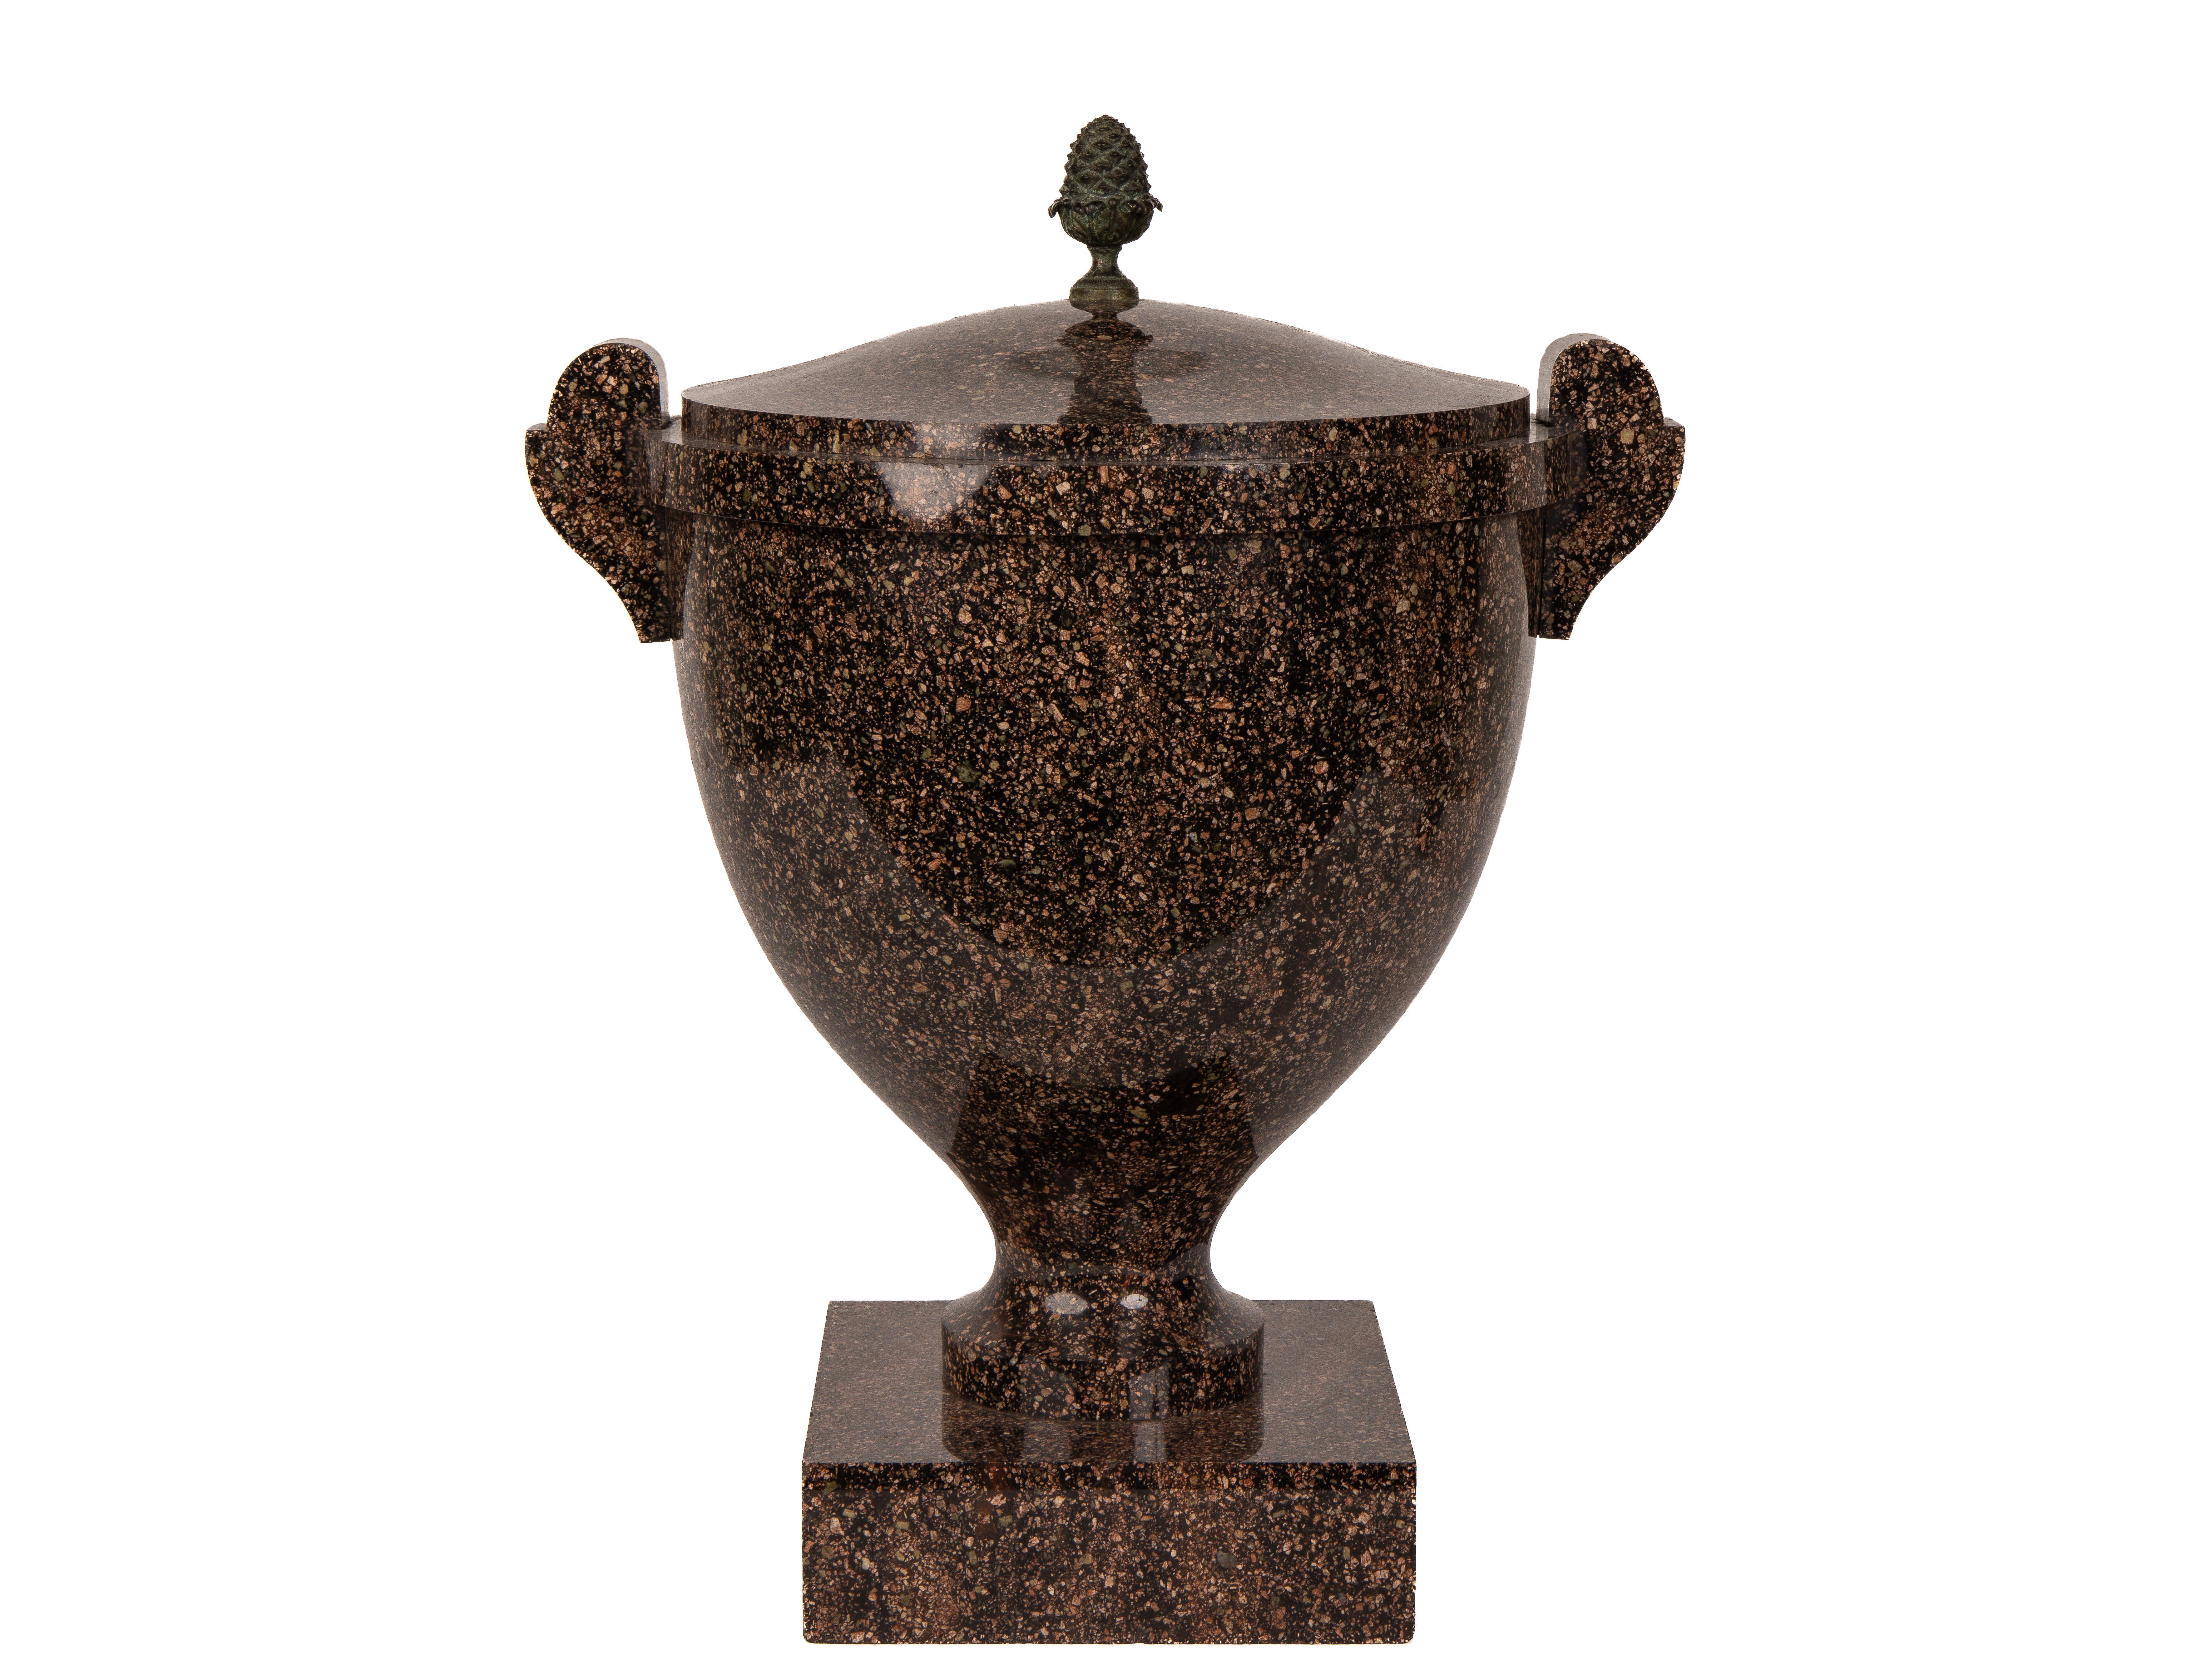 A large pair of Swedish Neoclassical Blyberg Porphyry vases and covers, early 19th century, on square bases, with bronze pineapple finials to the covers.

Carved from solid porphyry stone, these majestic vases are one of a kind, and extremely rare